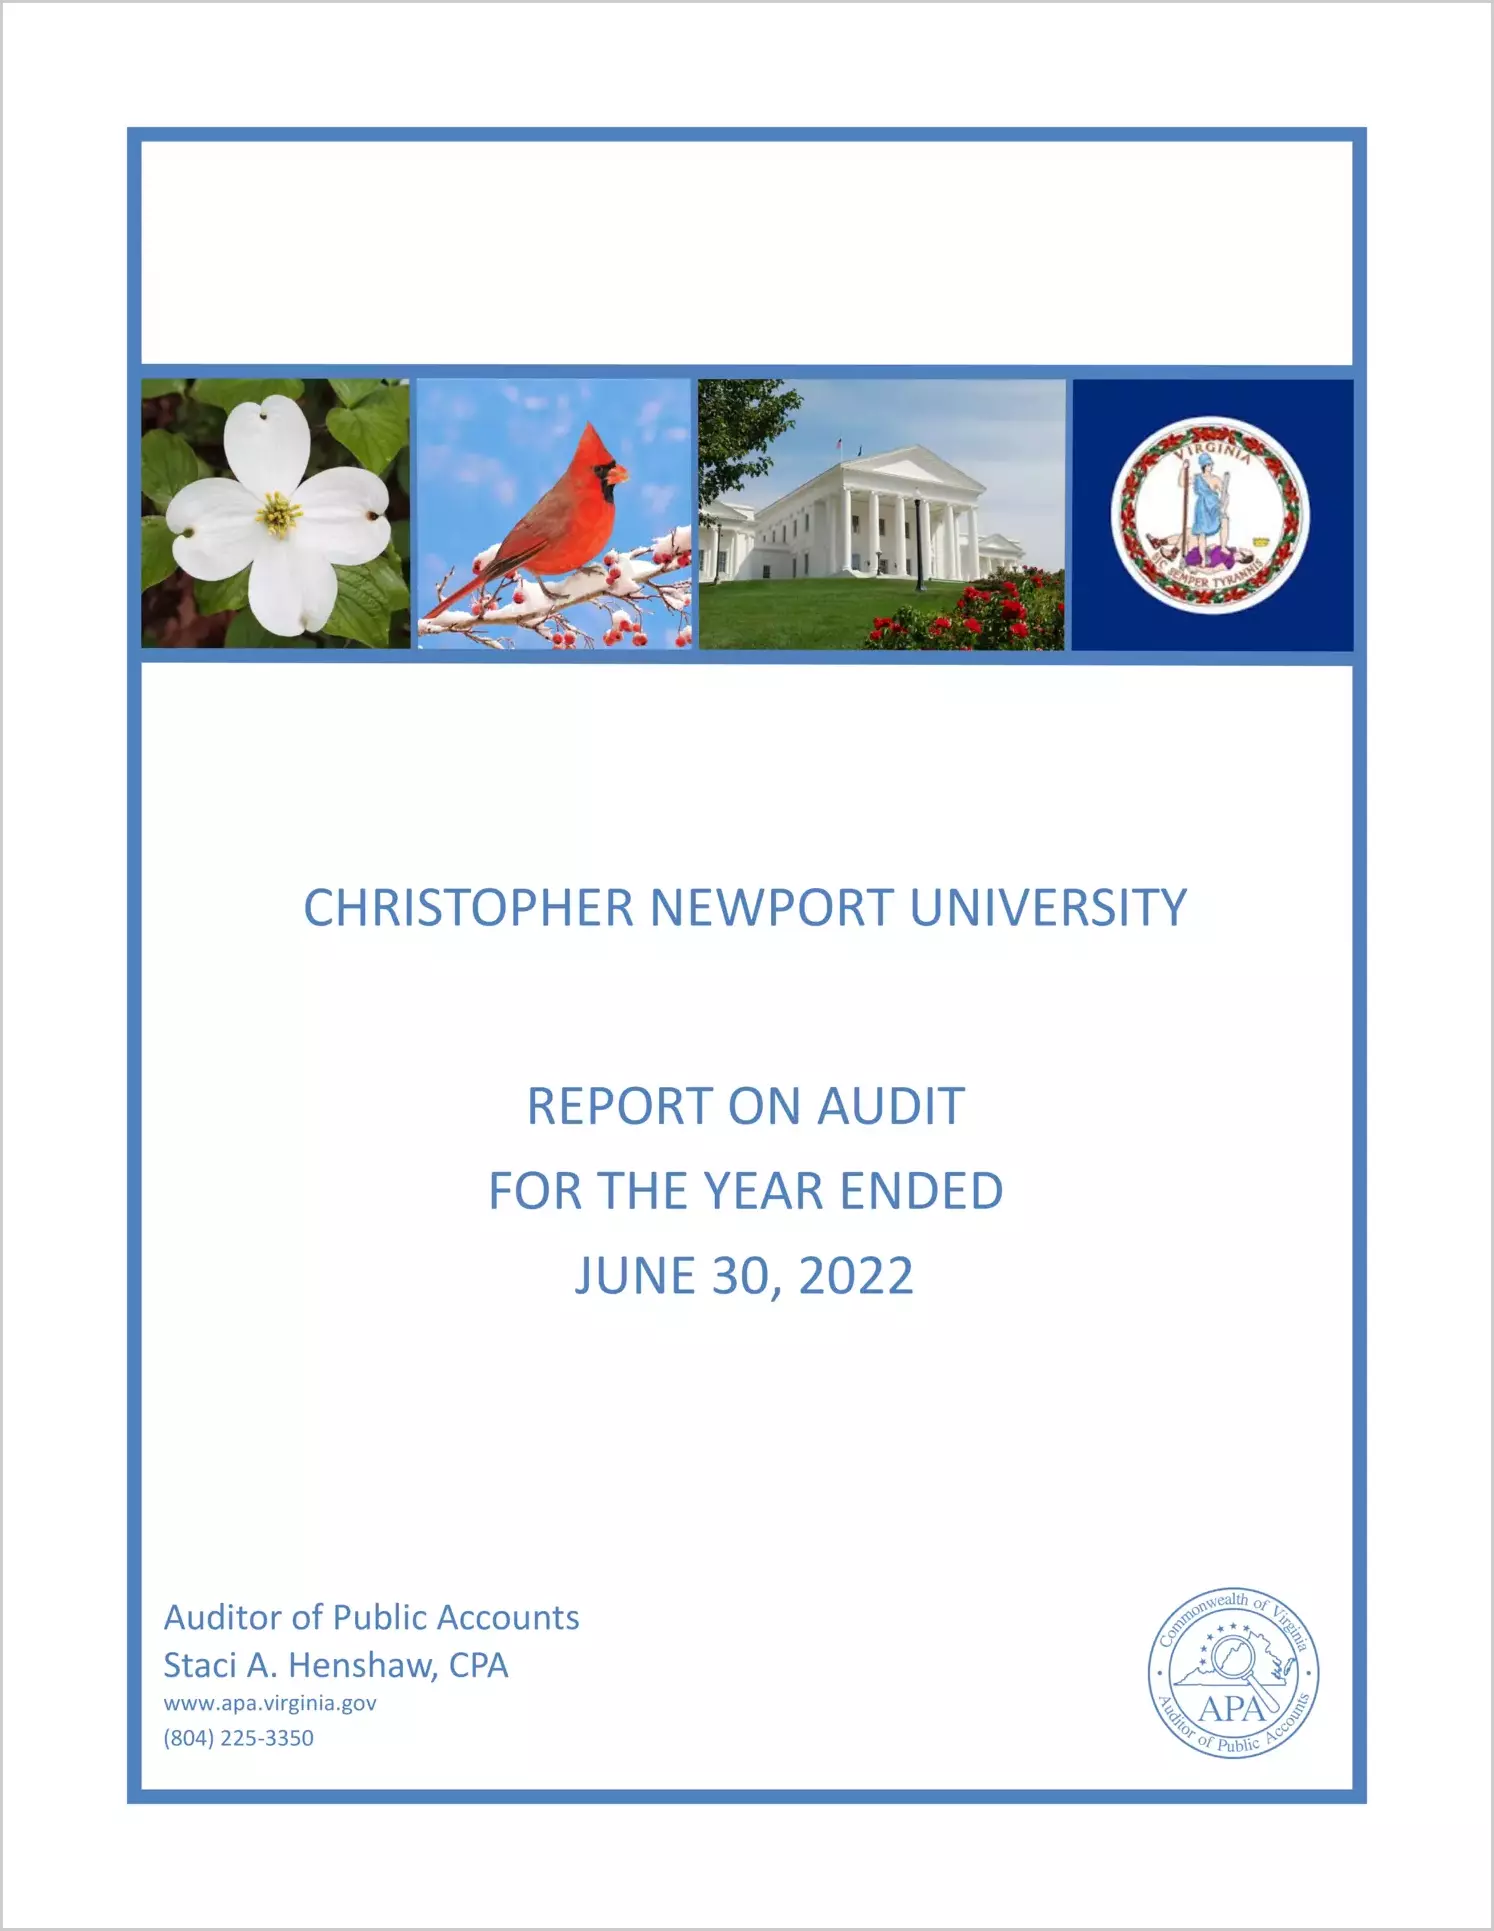 Christopher Newport University for the year ended June 30, 2022